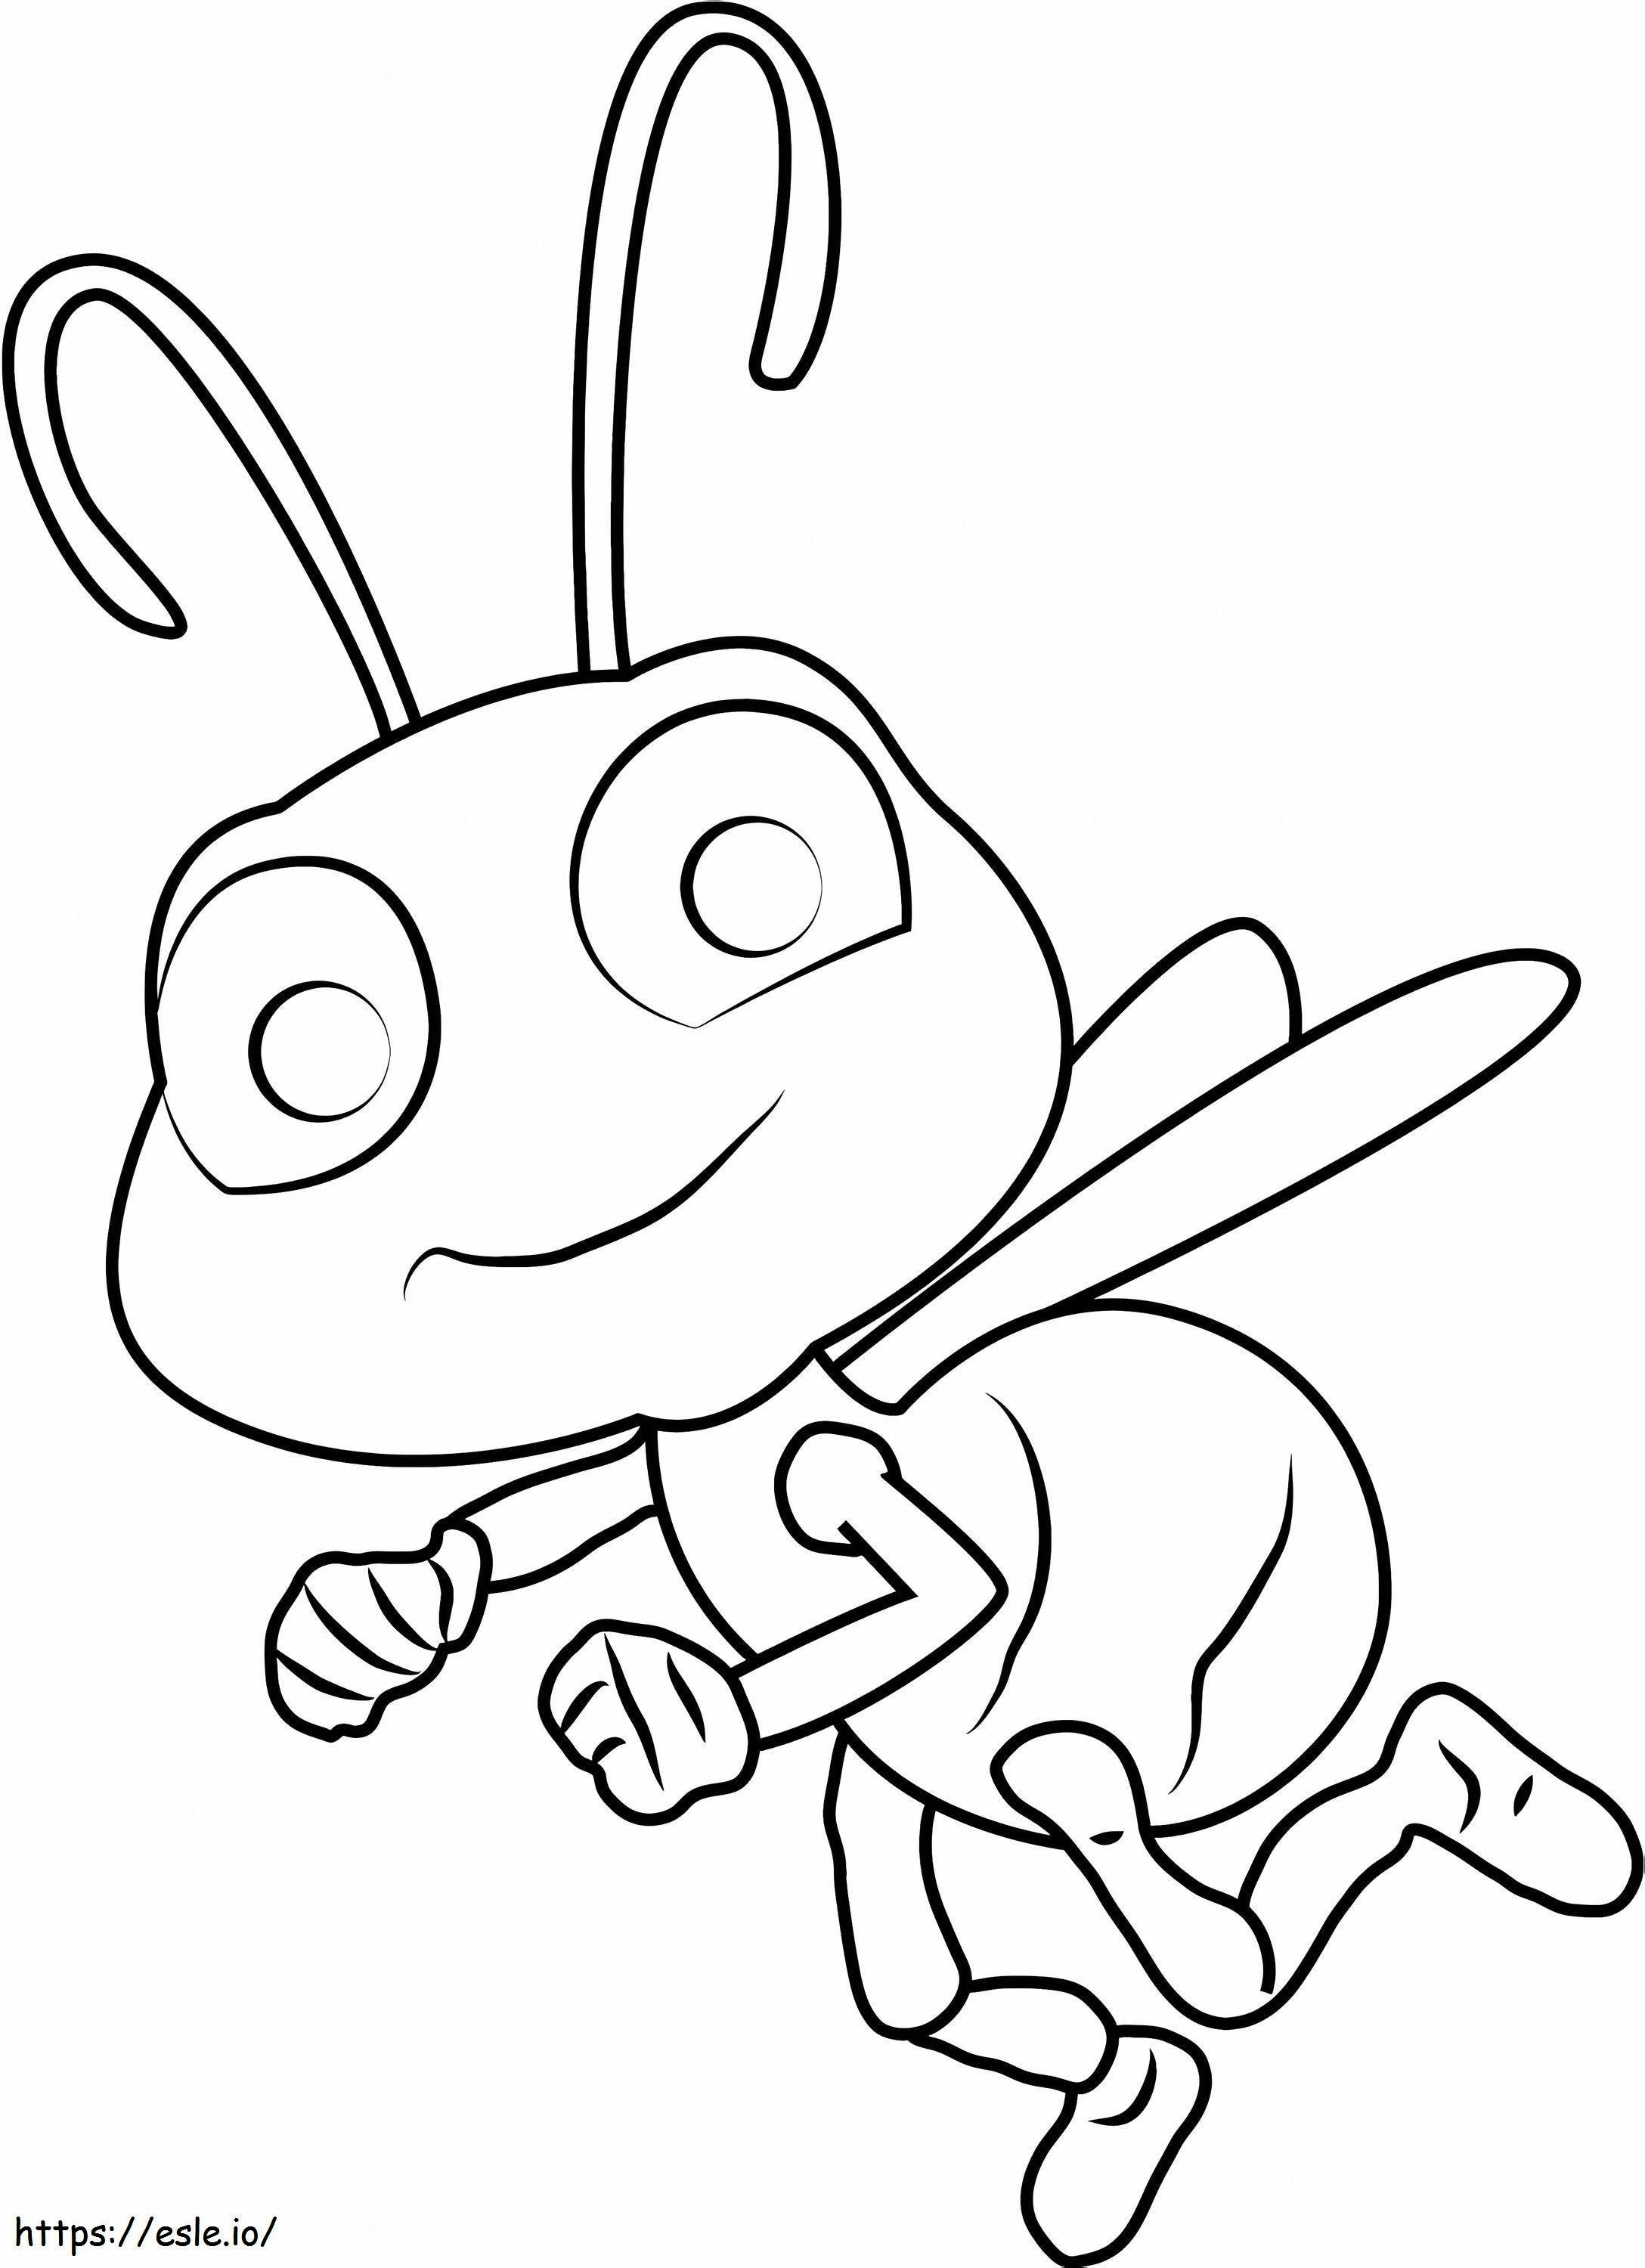 Dot Flying coloring page